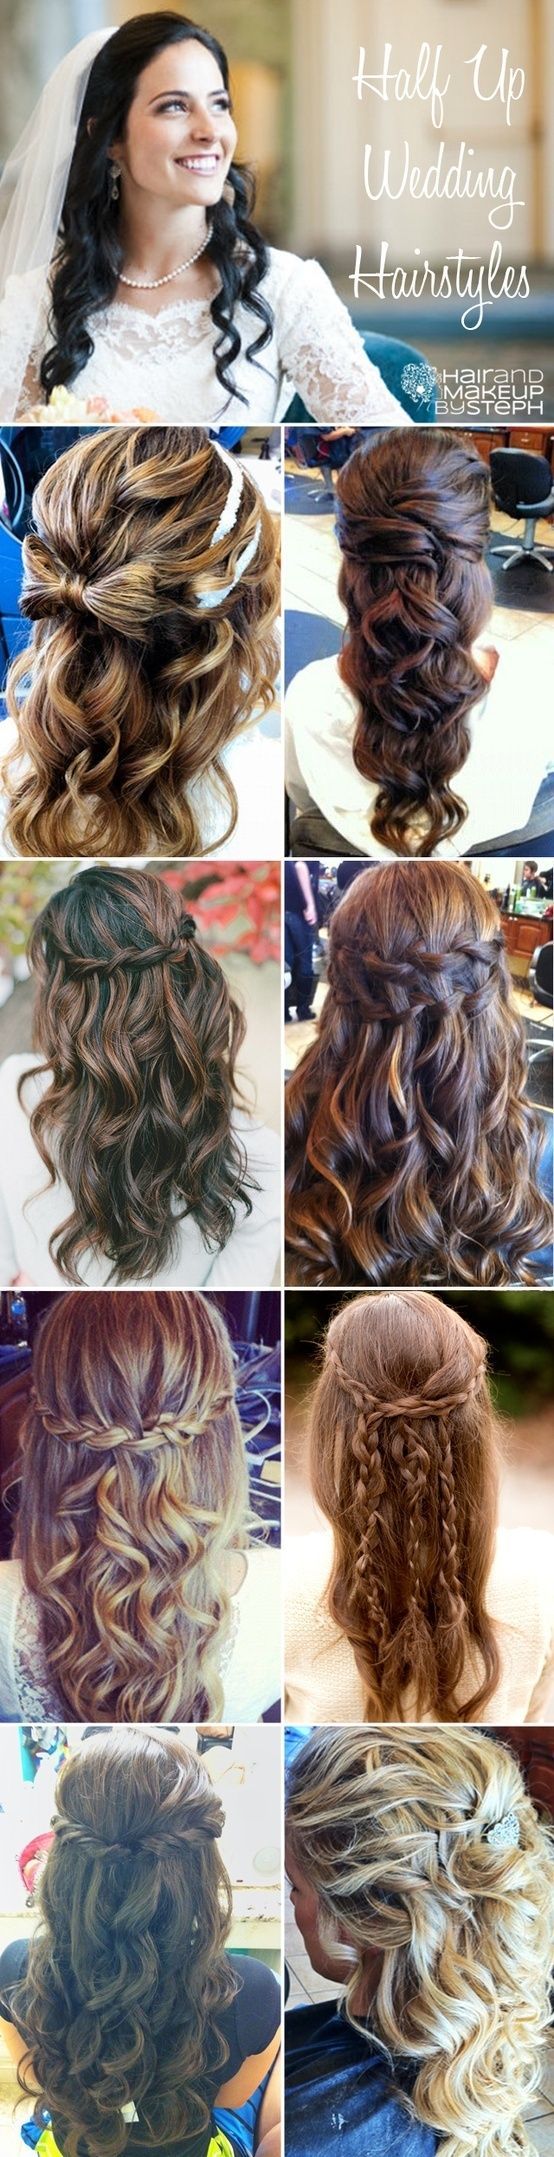 half-up/half-down hairstyles! I just want my hair to curl like that please someb